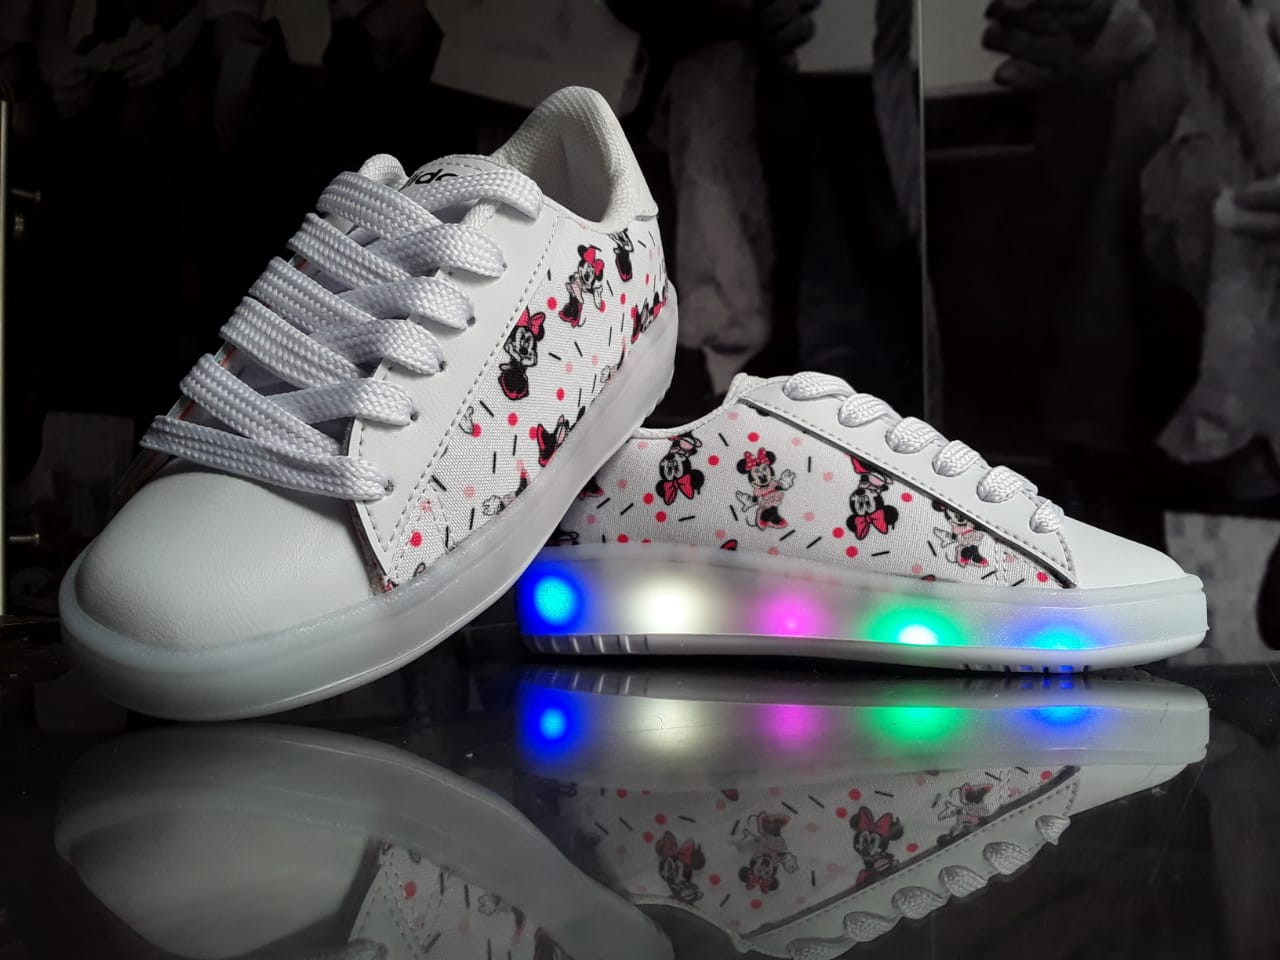 Imagen TENIS ADIDAS CON LUCES DISEÑO MINNIE MICKY MOUSE 3